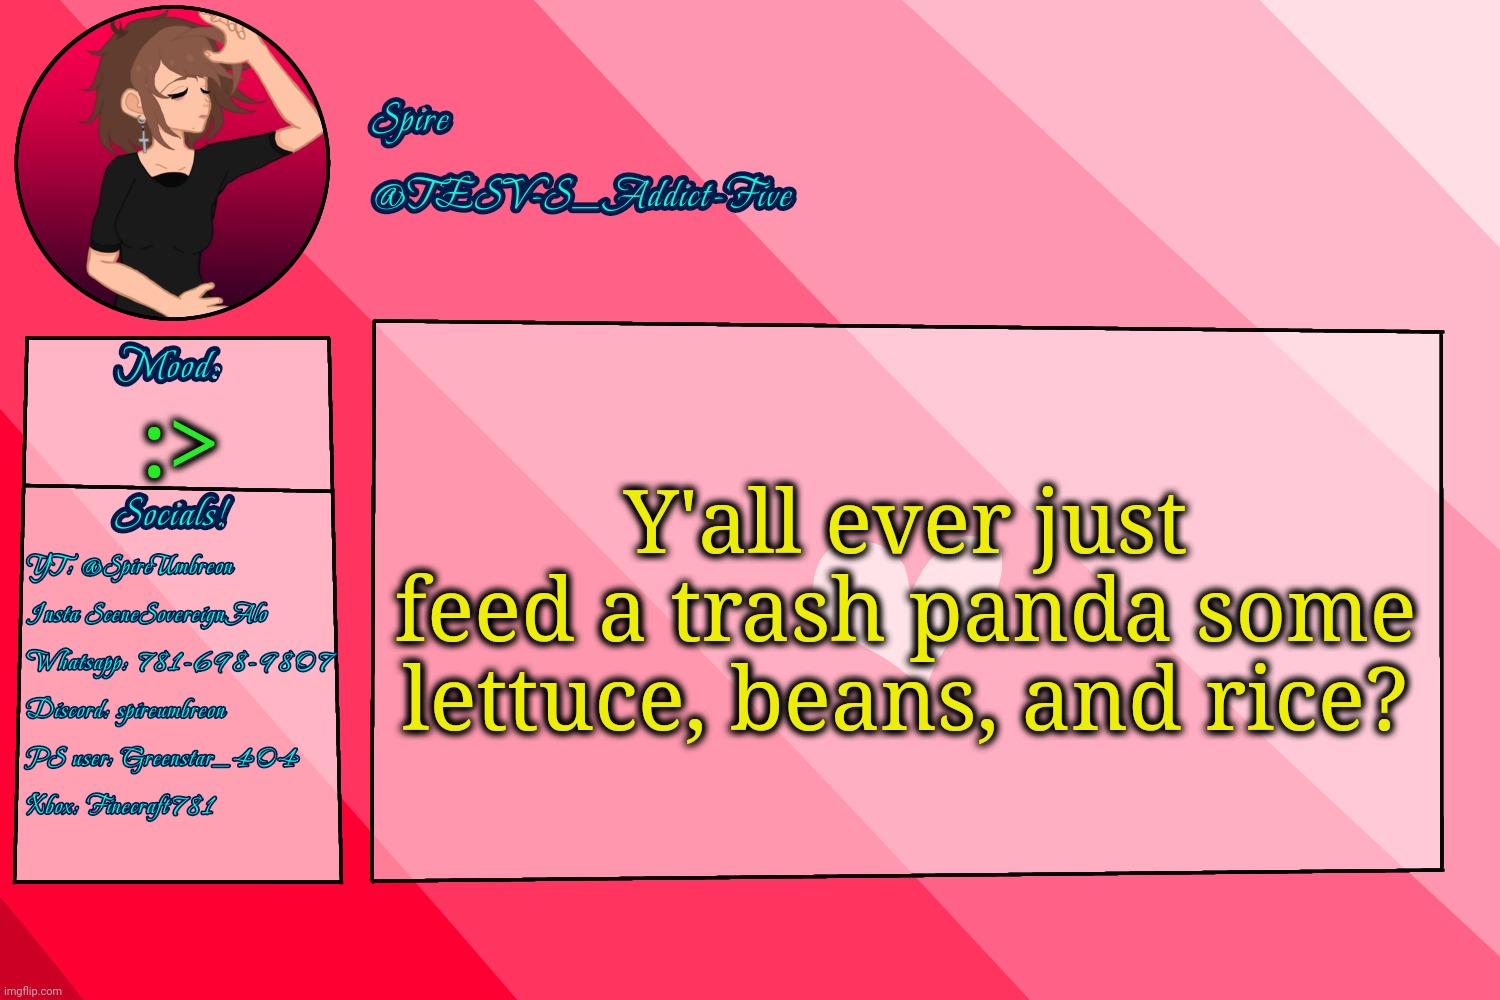 . | Y'all ever just feed a trash panda some lettuce, beans, and rice? :> | image tagged in tesv-s_addict-five announcement template | made w/ Imgflip meme maker